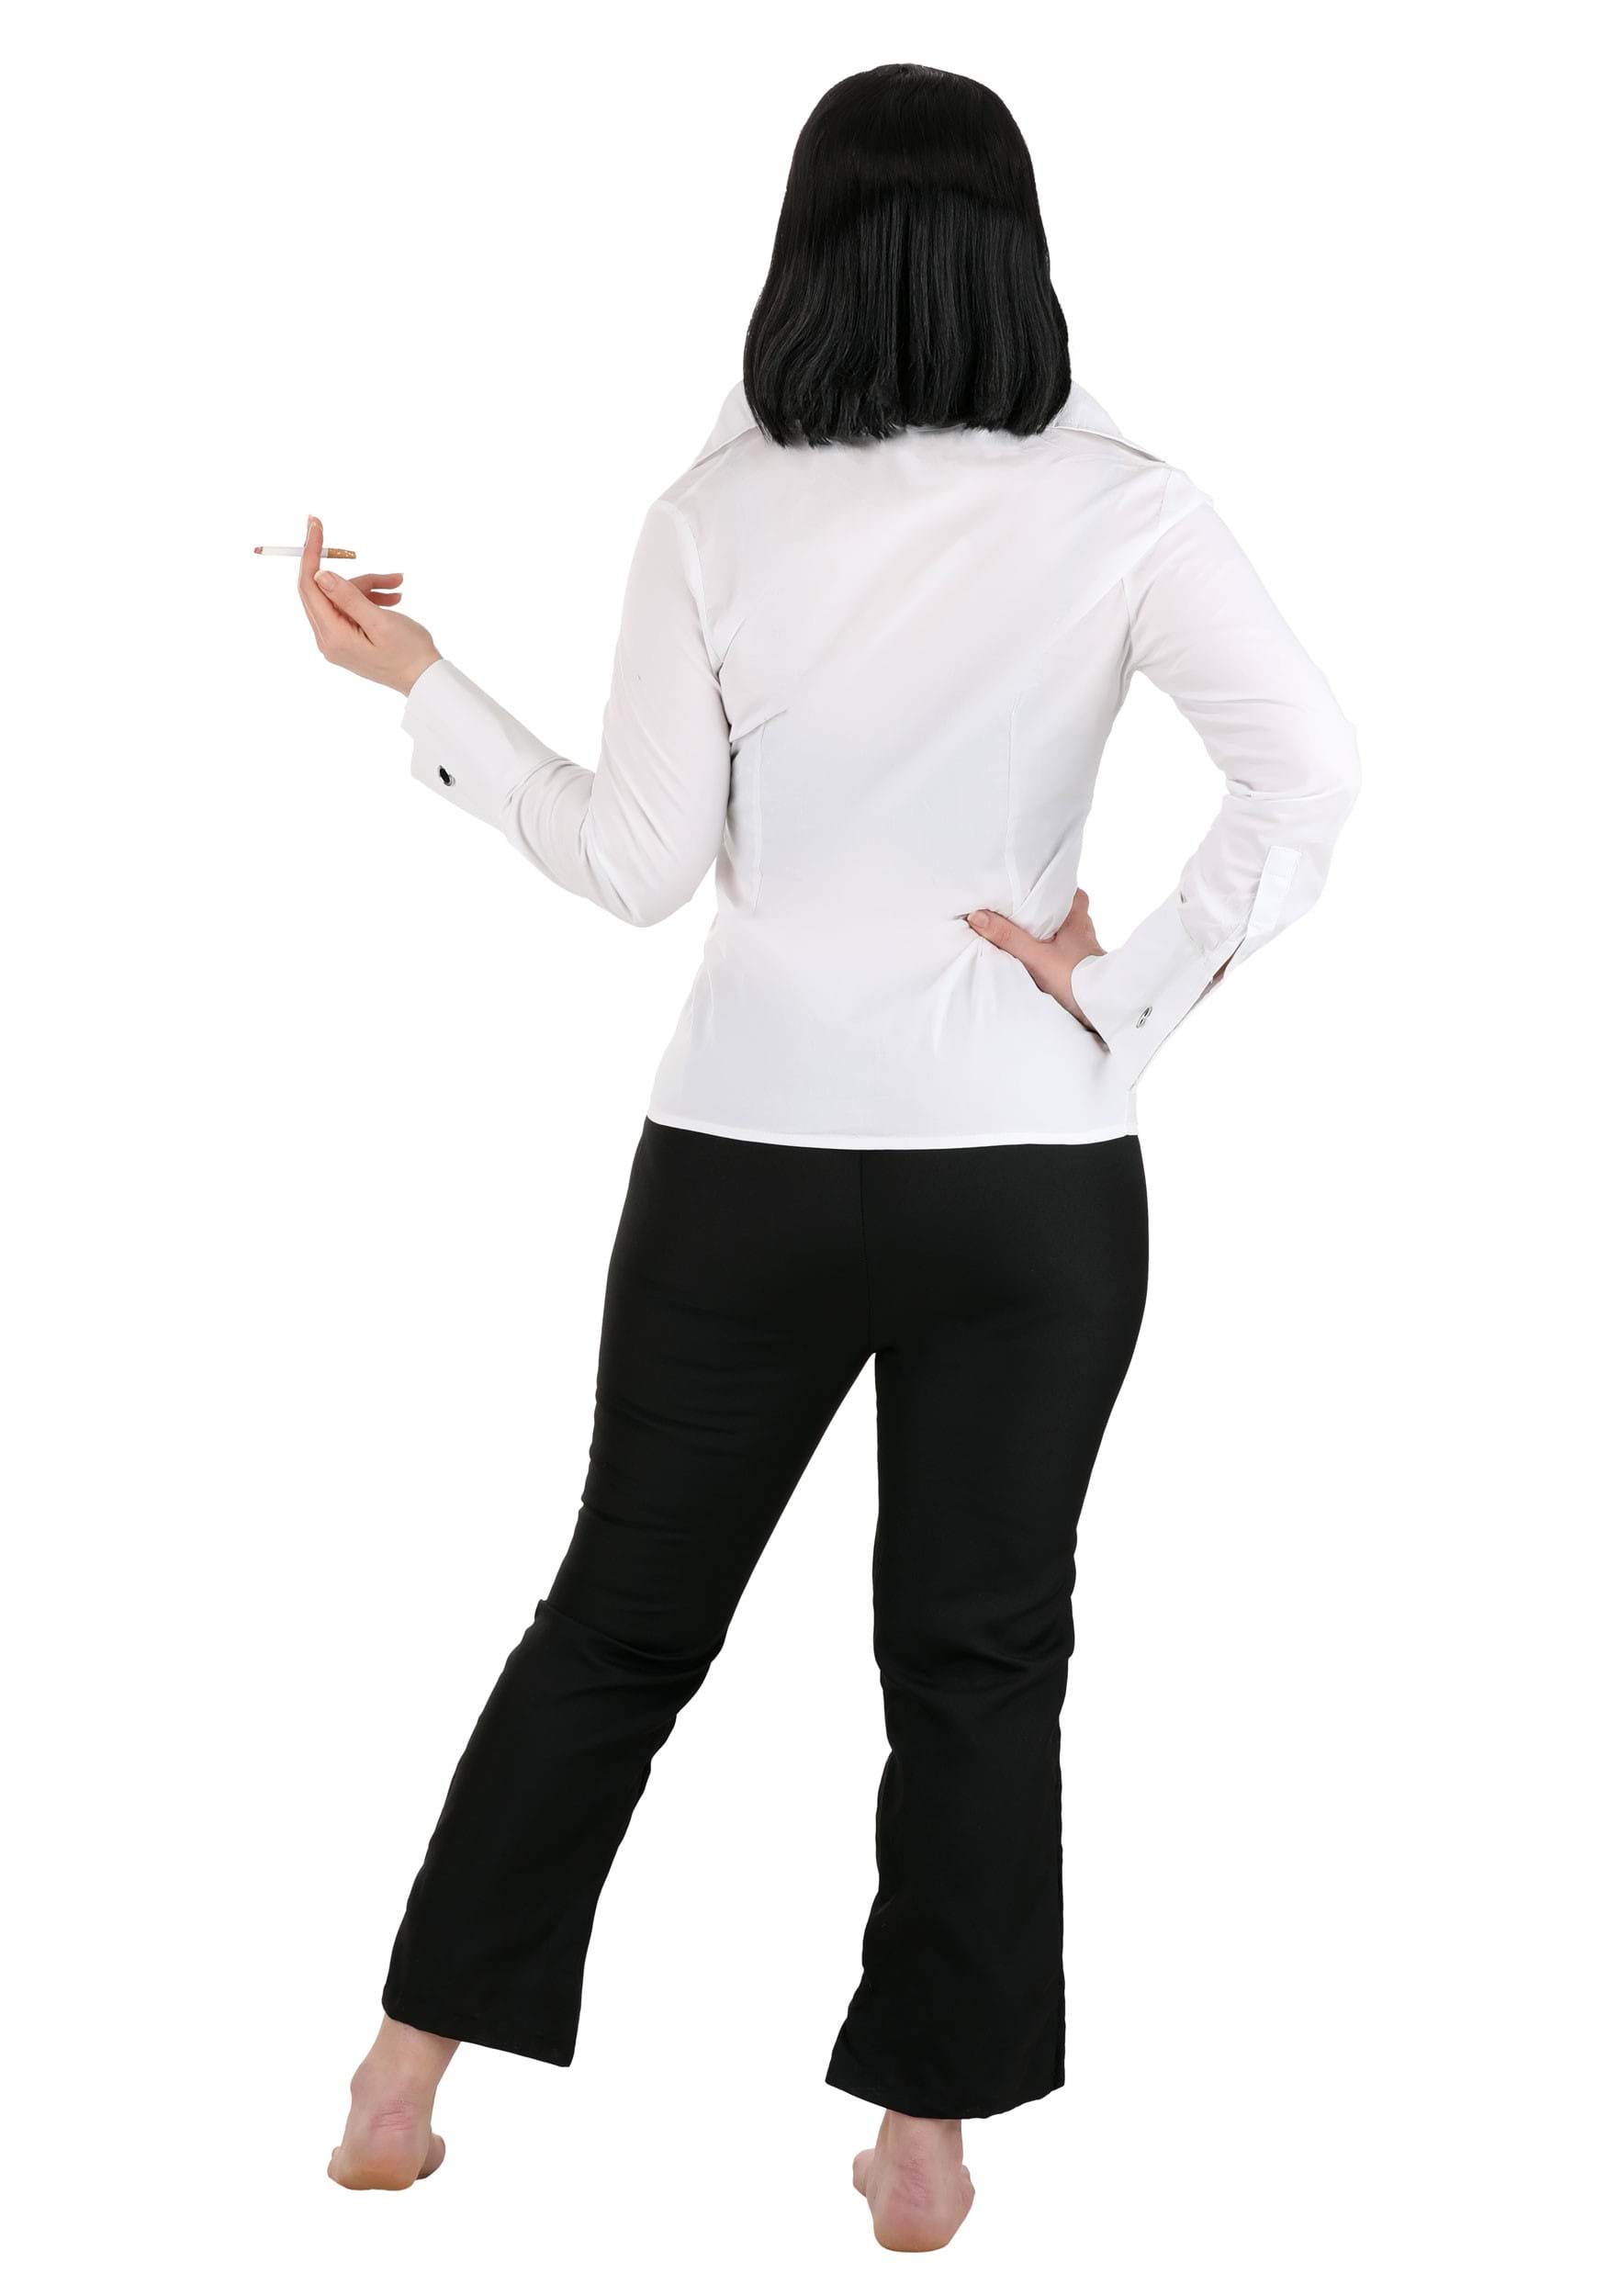 Mia Wallace Pulp Fiction Costume for Women